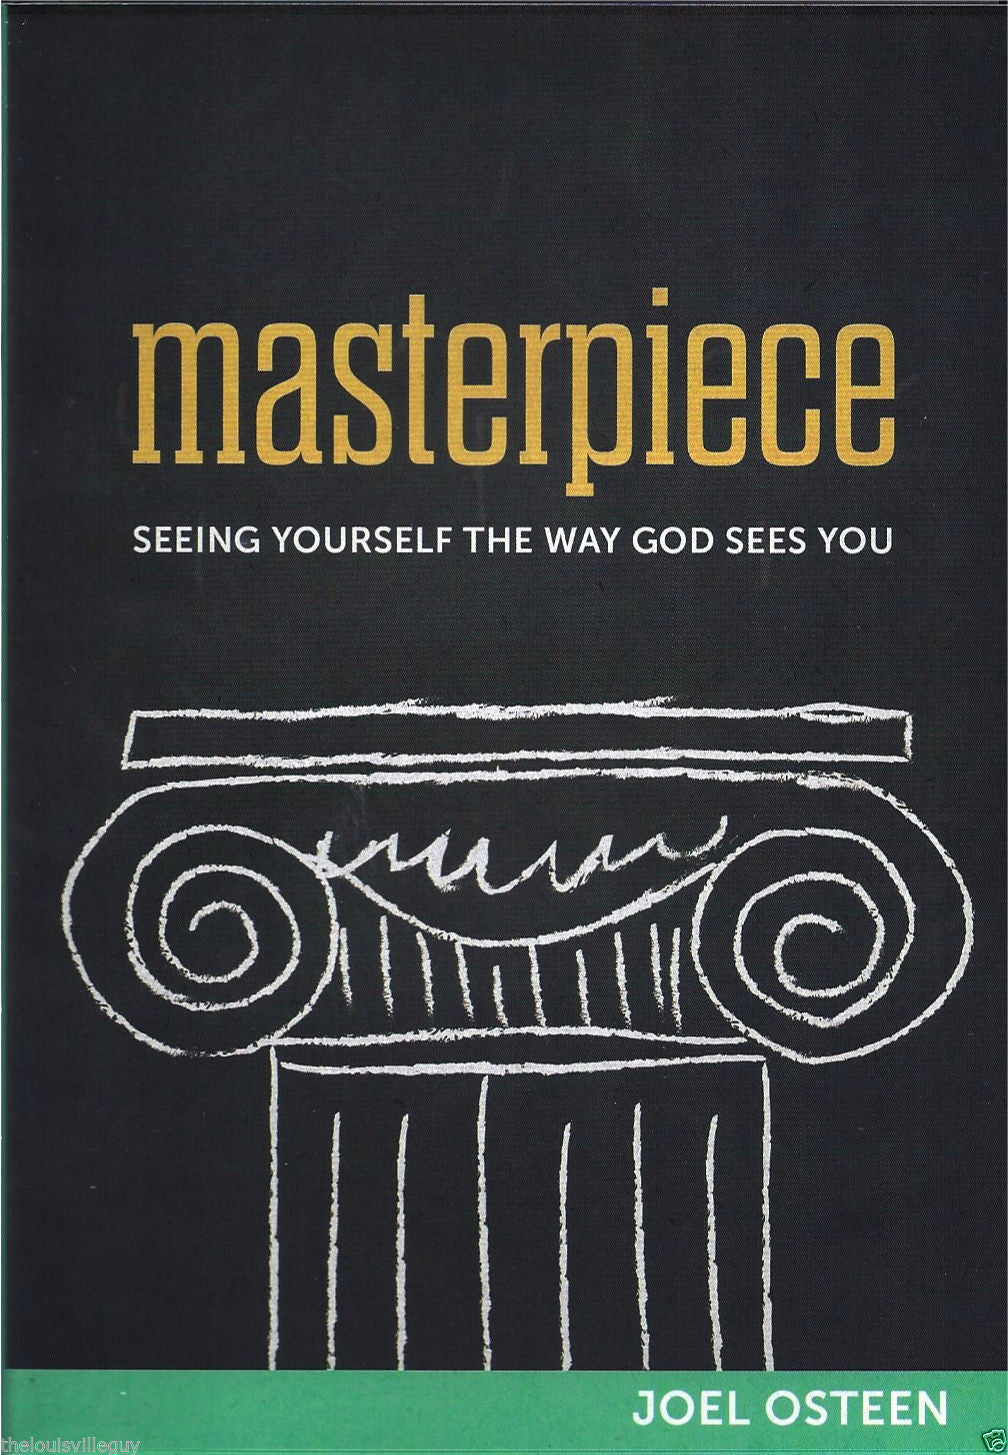 Masterpiece - Seeing You How God Sees You! - Joel Osteen - 2 CD/2 DVD Set